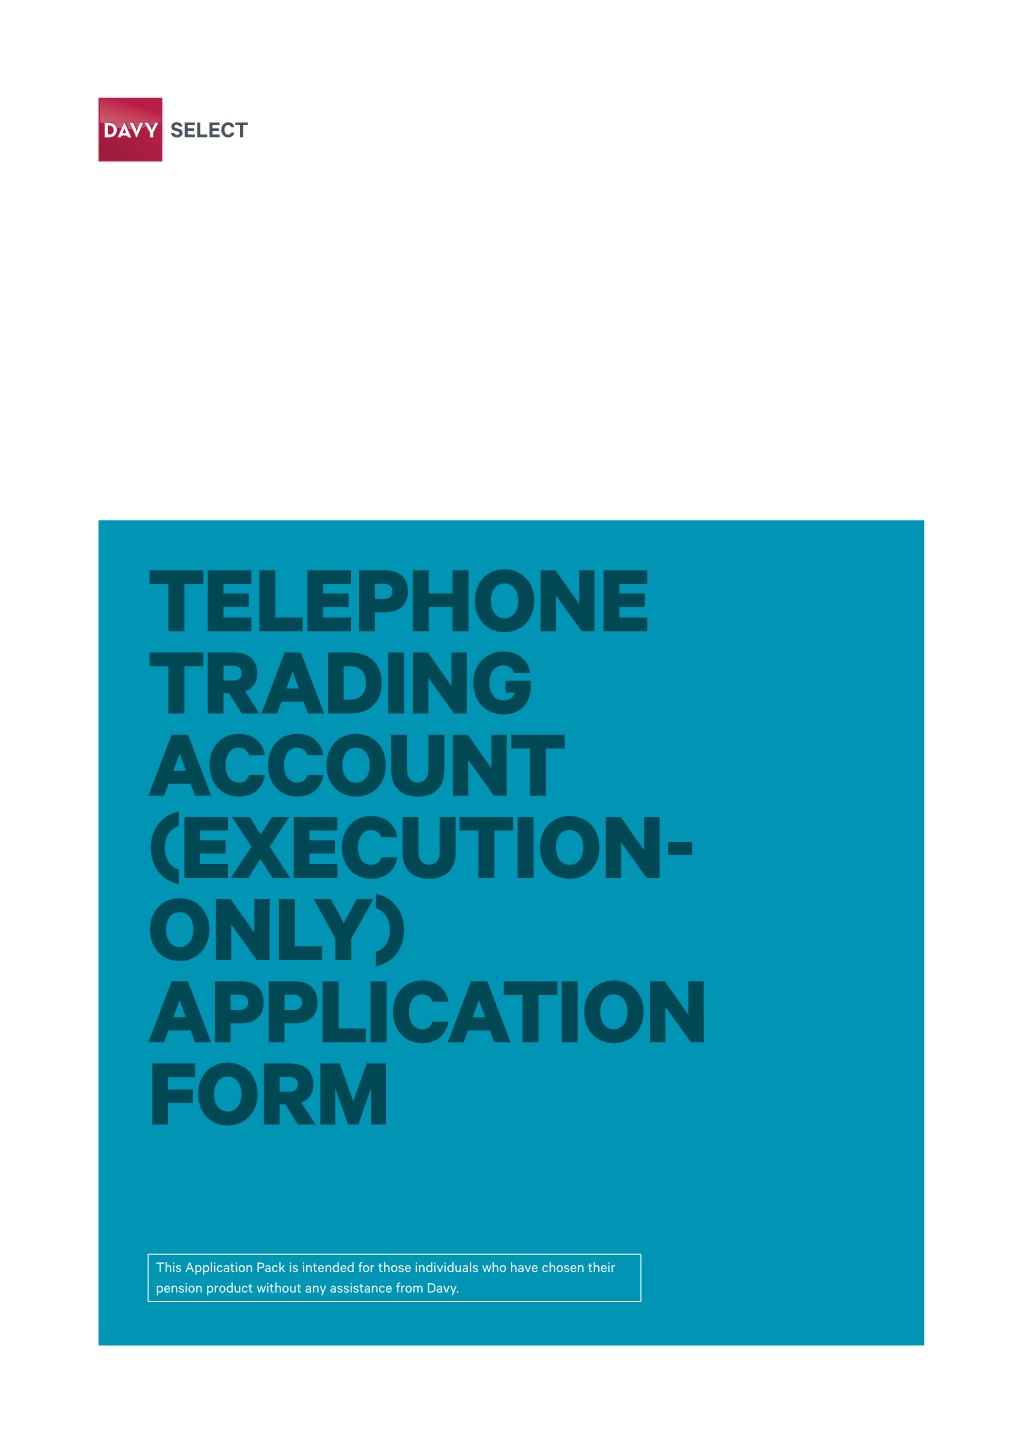 Execution- Only) Application Form